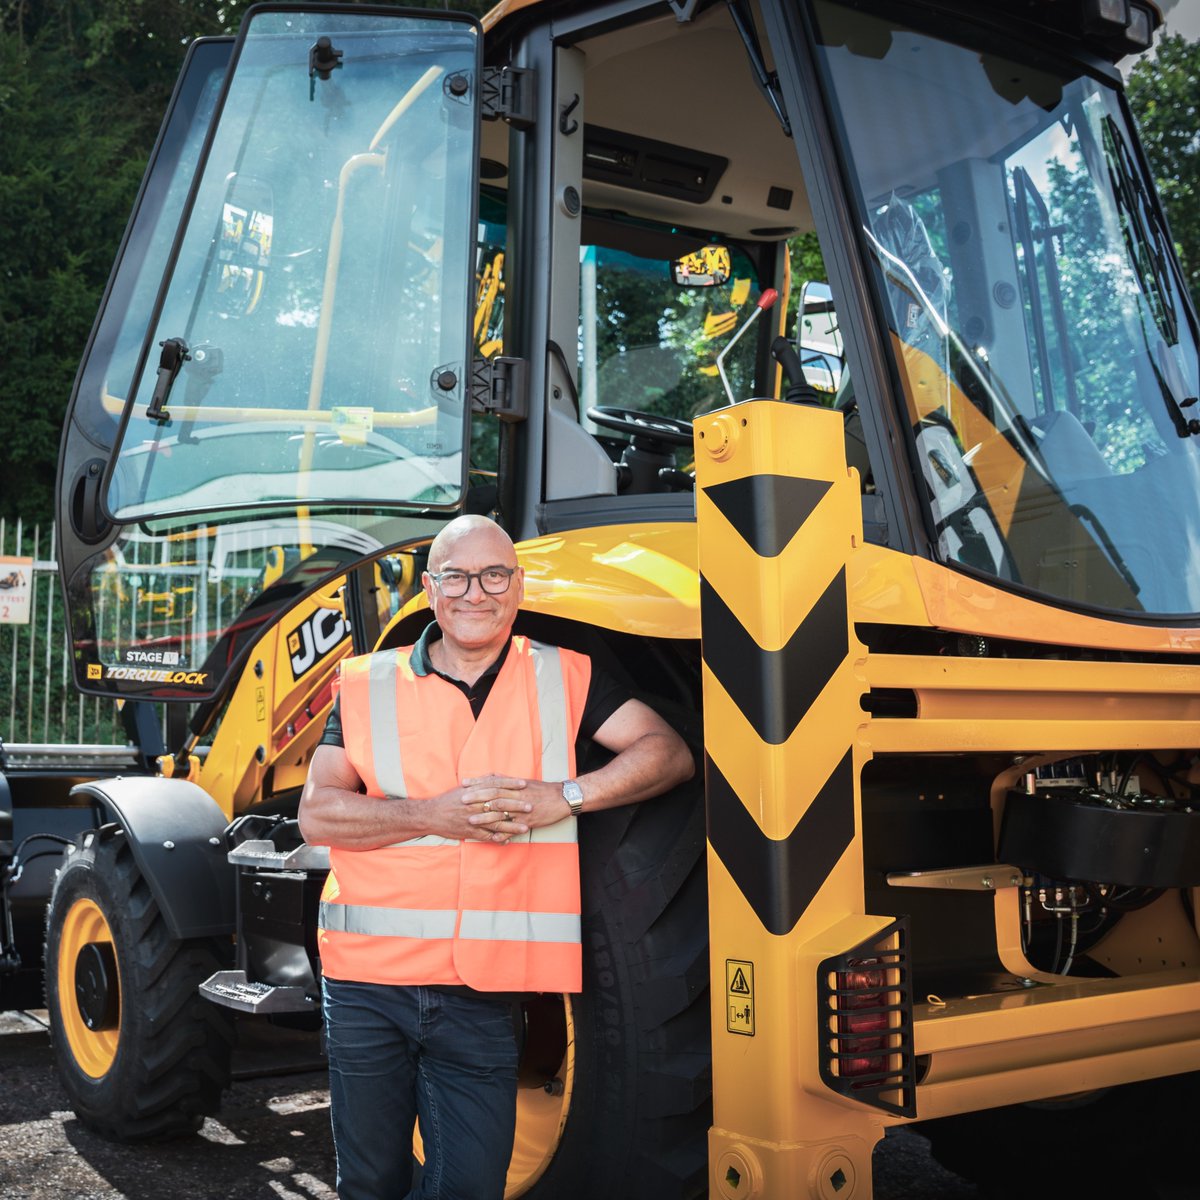 Catch #JCB on the small screen with presenters @GreggAWallace and @cherryhealey as part of Inside the Factory XL on 29th December on BBC2.